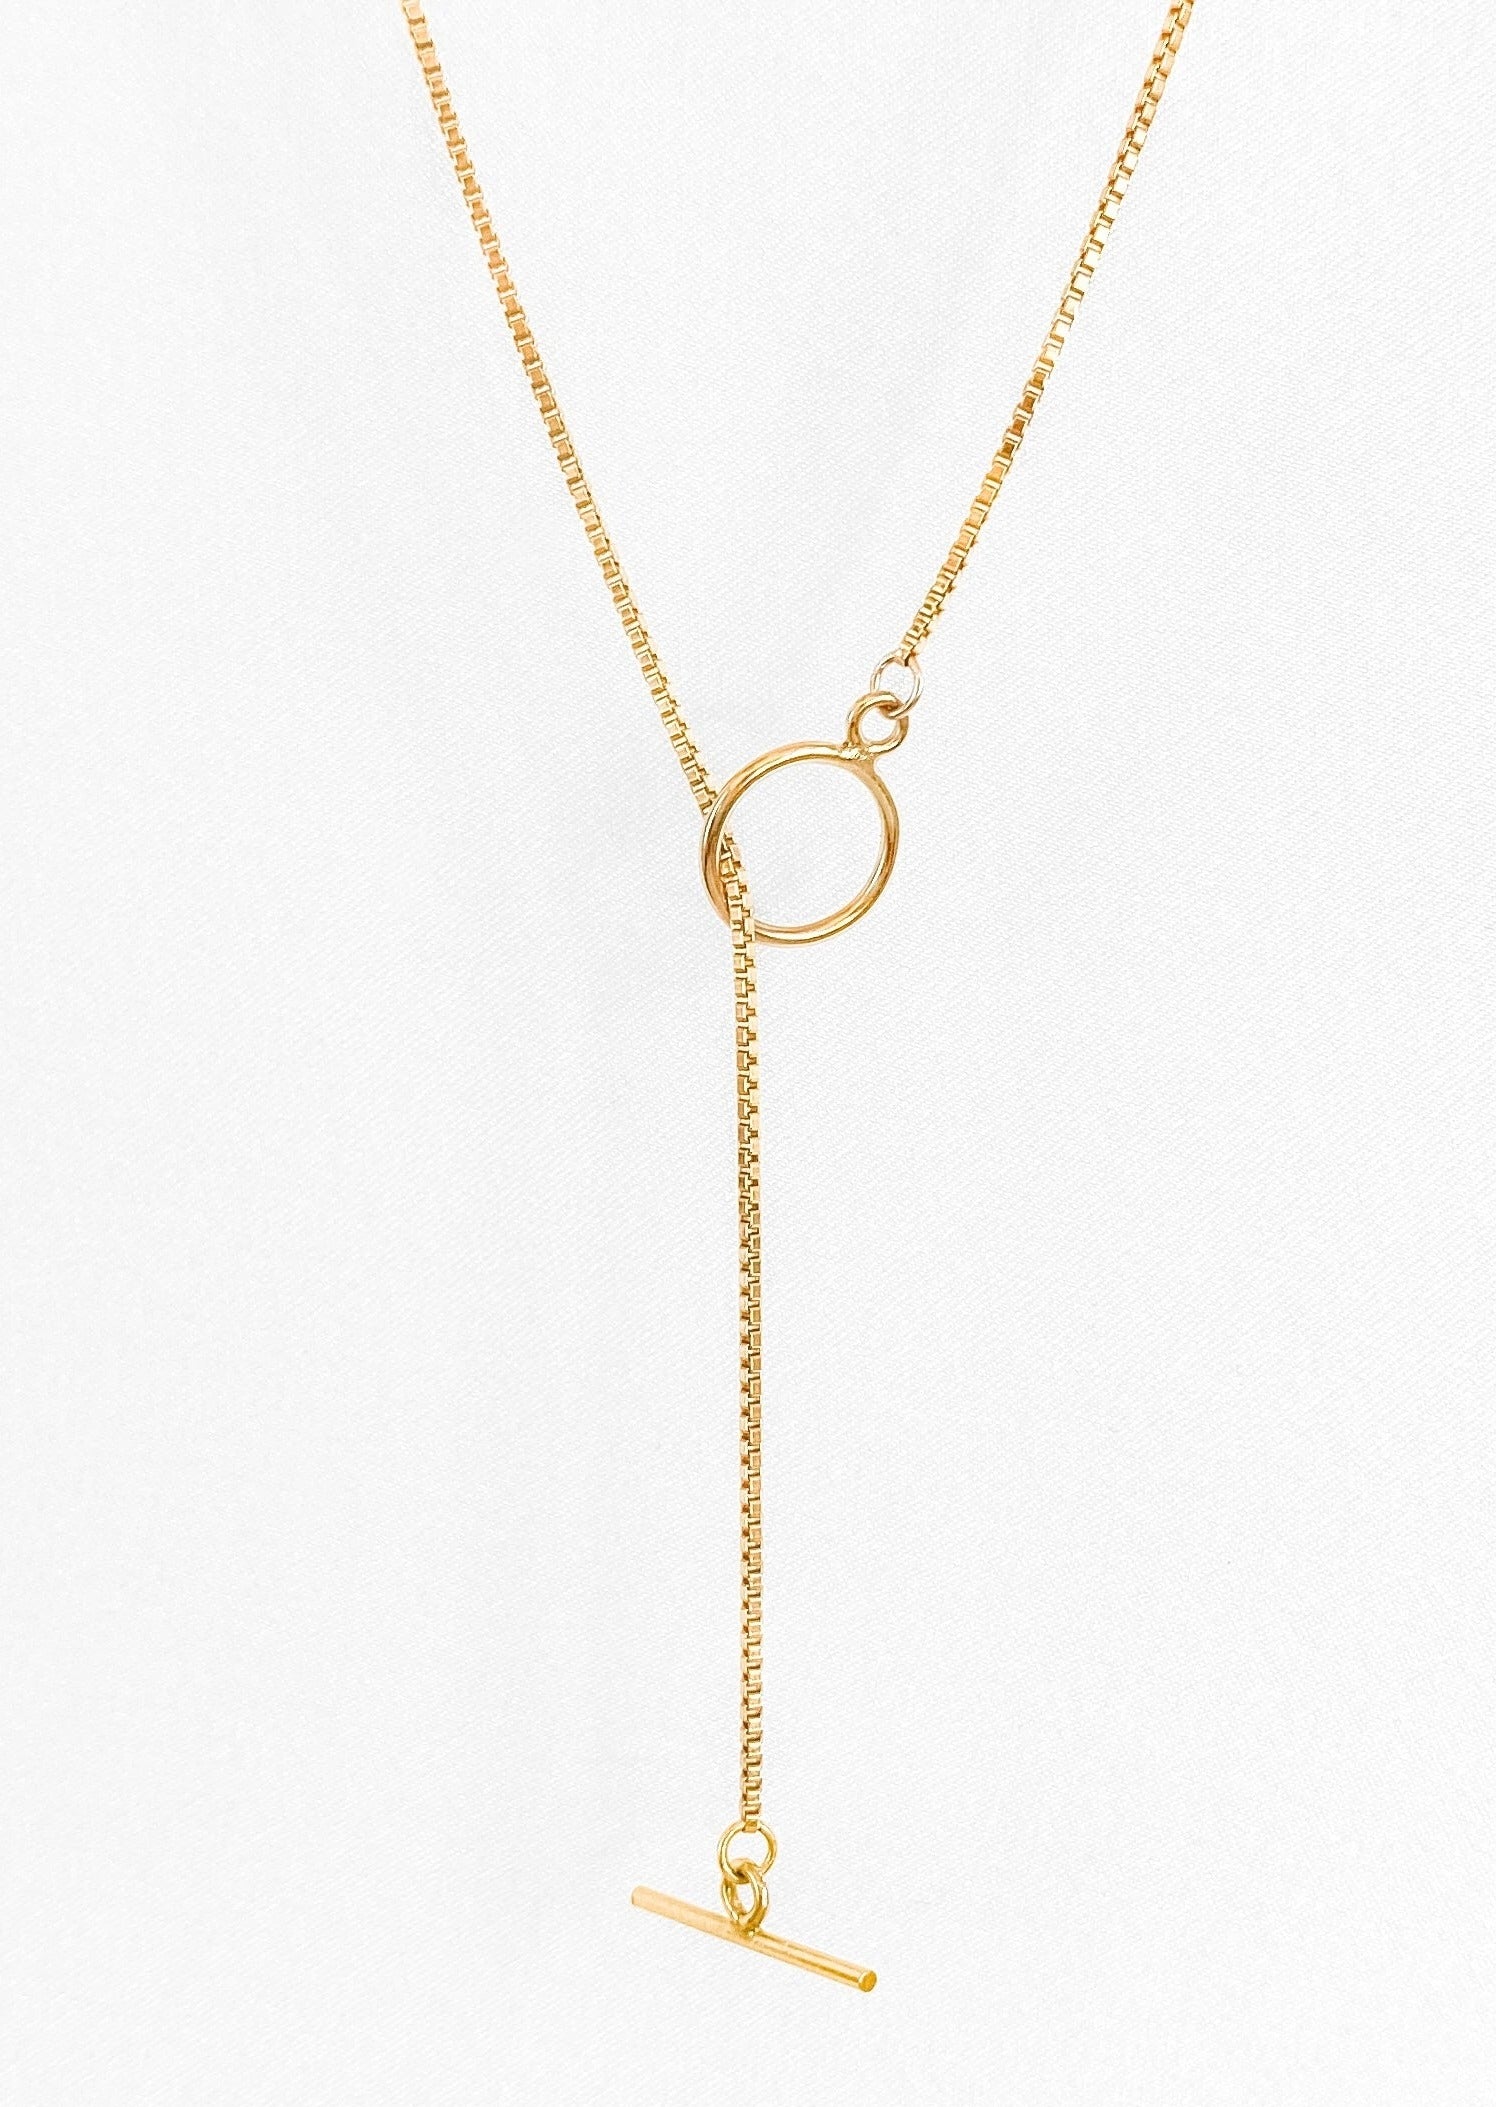 Open Circle Lariat, Gold Y Necklace, Long Gold Necklace, Simple Y Necklace,  14k Gold Fill, Sterling Silver, Leilajewelryshop, N202 -  Canada